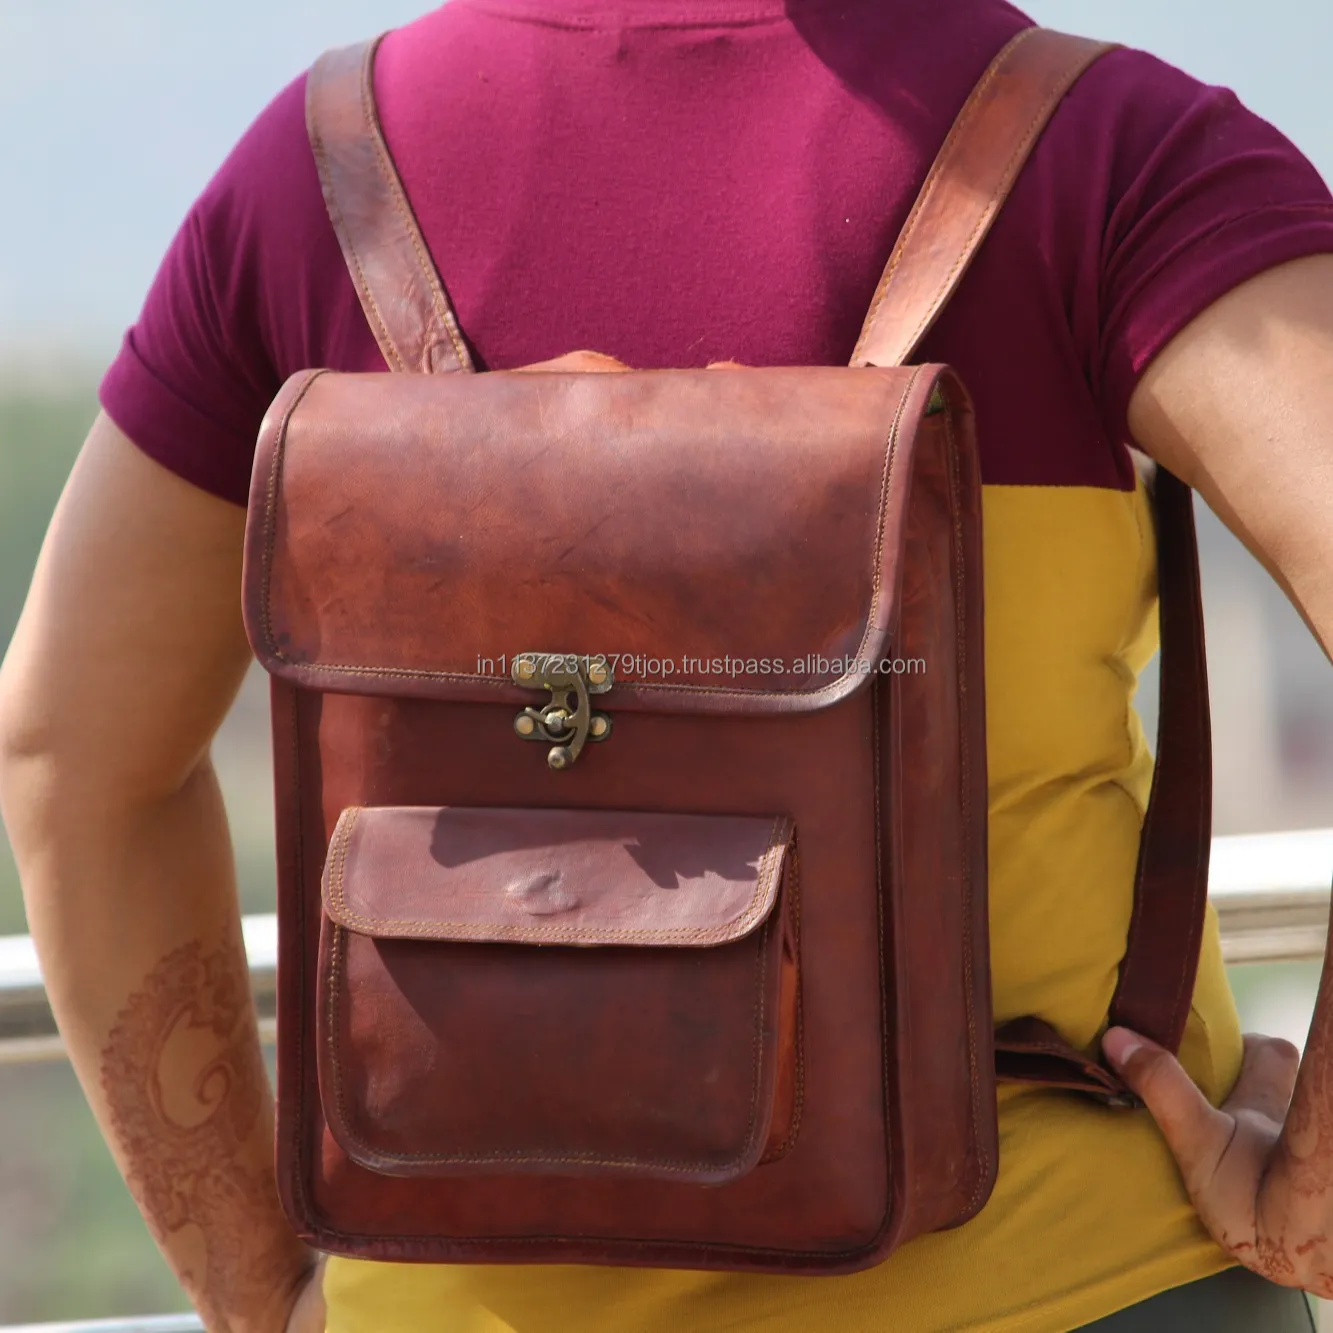 Handmade Stylish Goat Leather Two In One Messenger Bag Backpack Stylish Leather Backpack